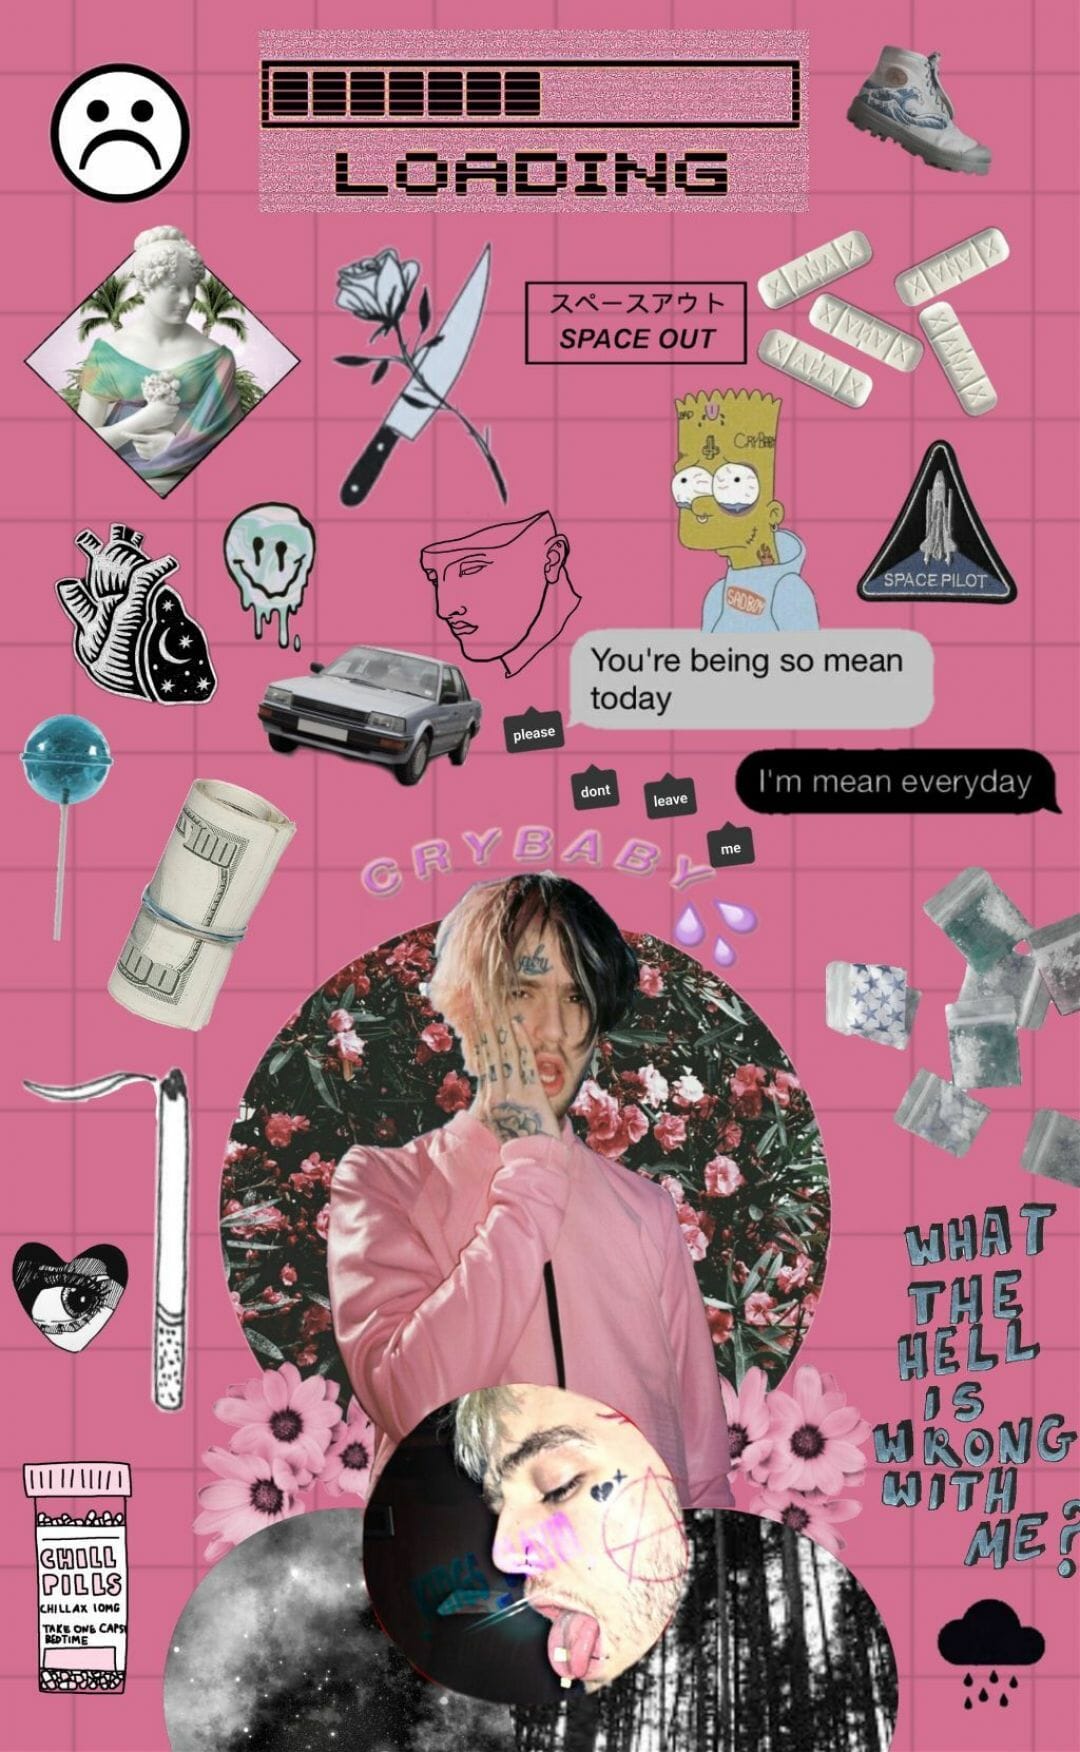 Lil Peep wallpaper I made! If you use it please give credit - Lil Peep, pink collage